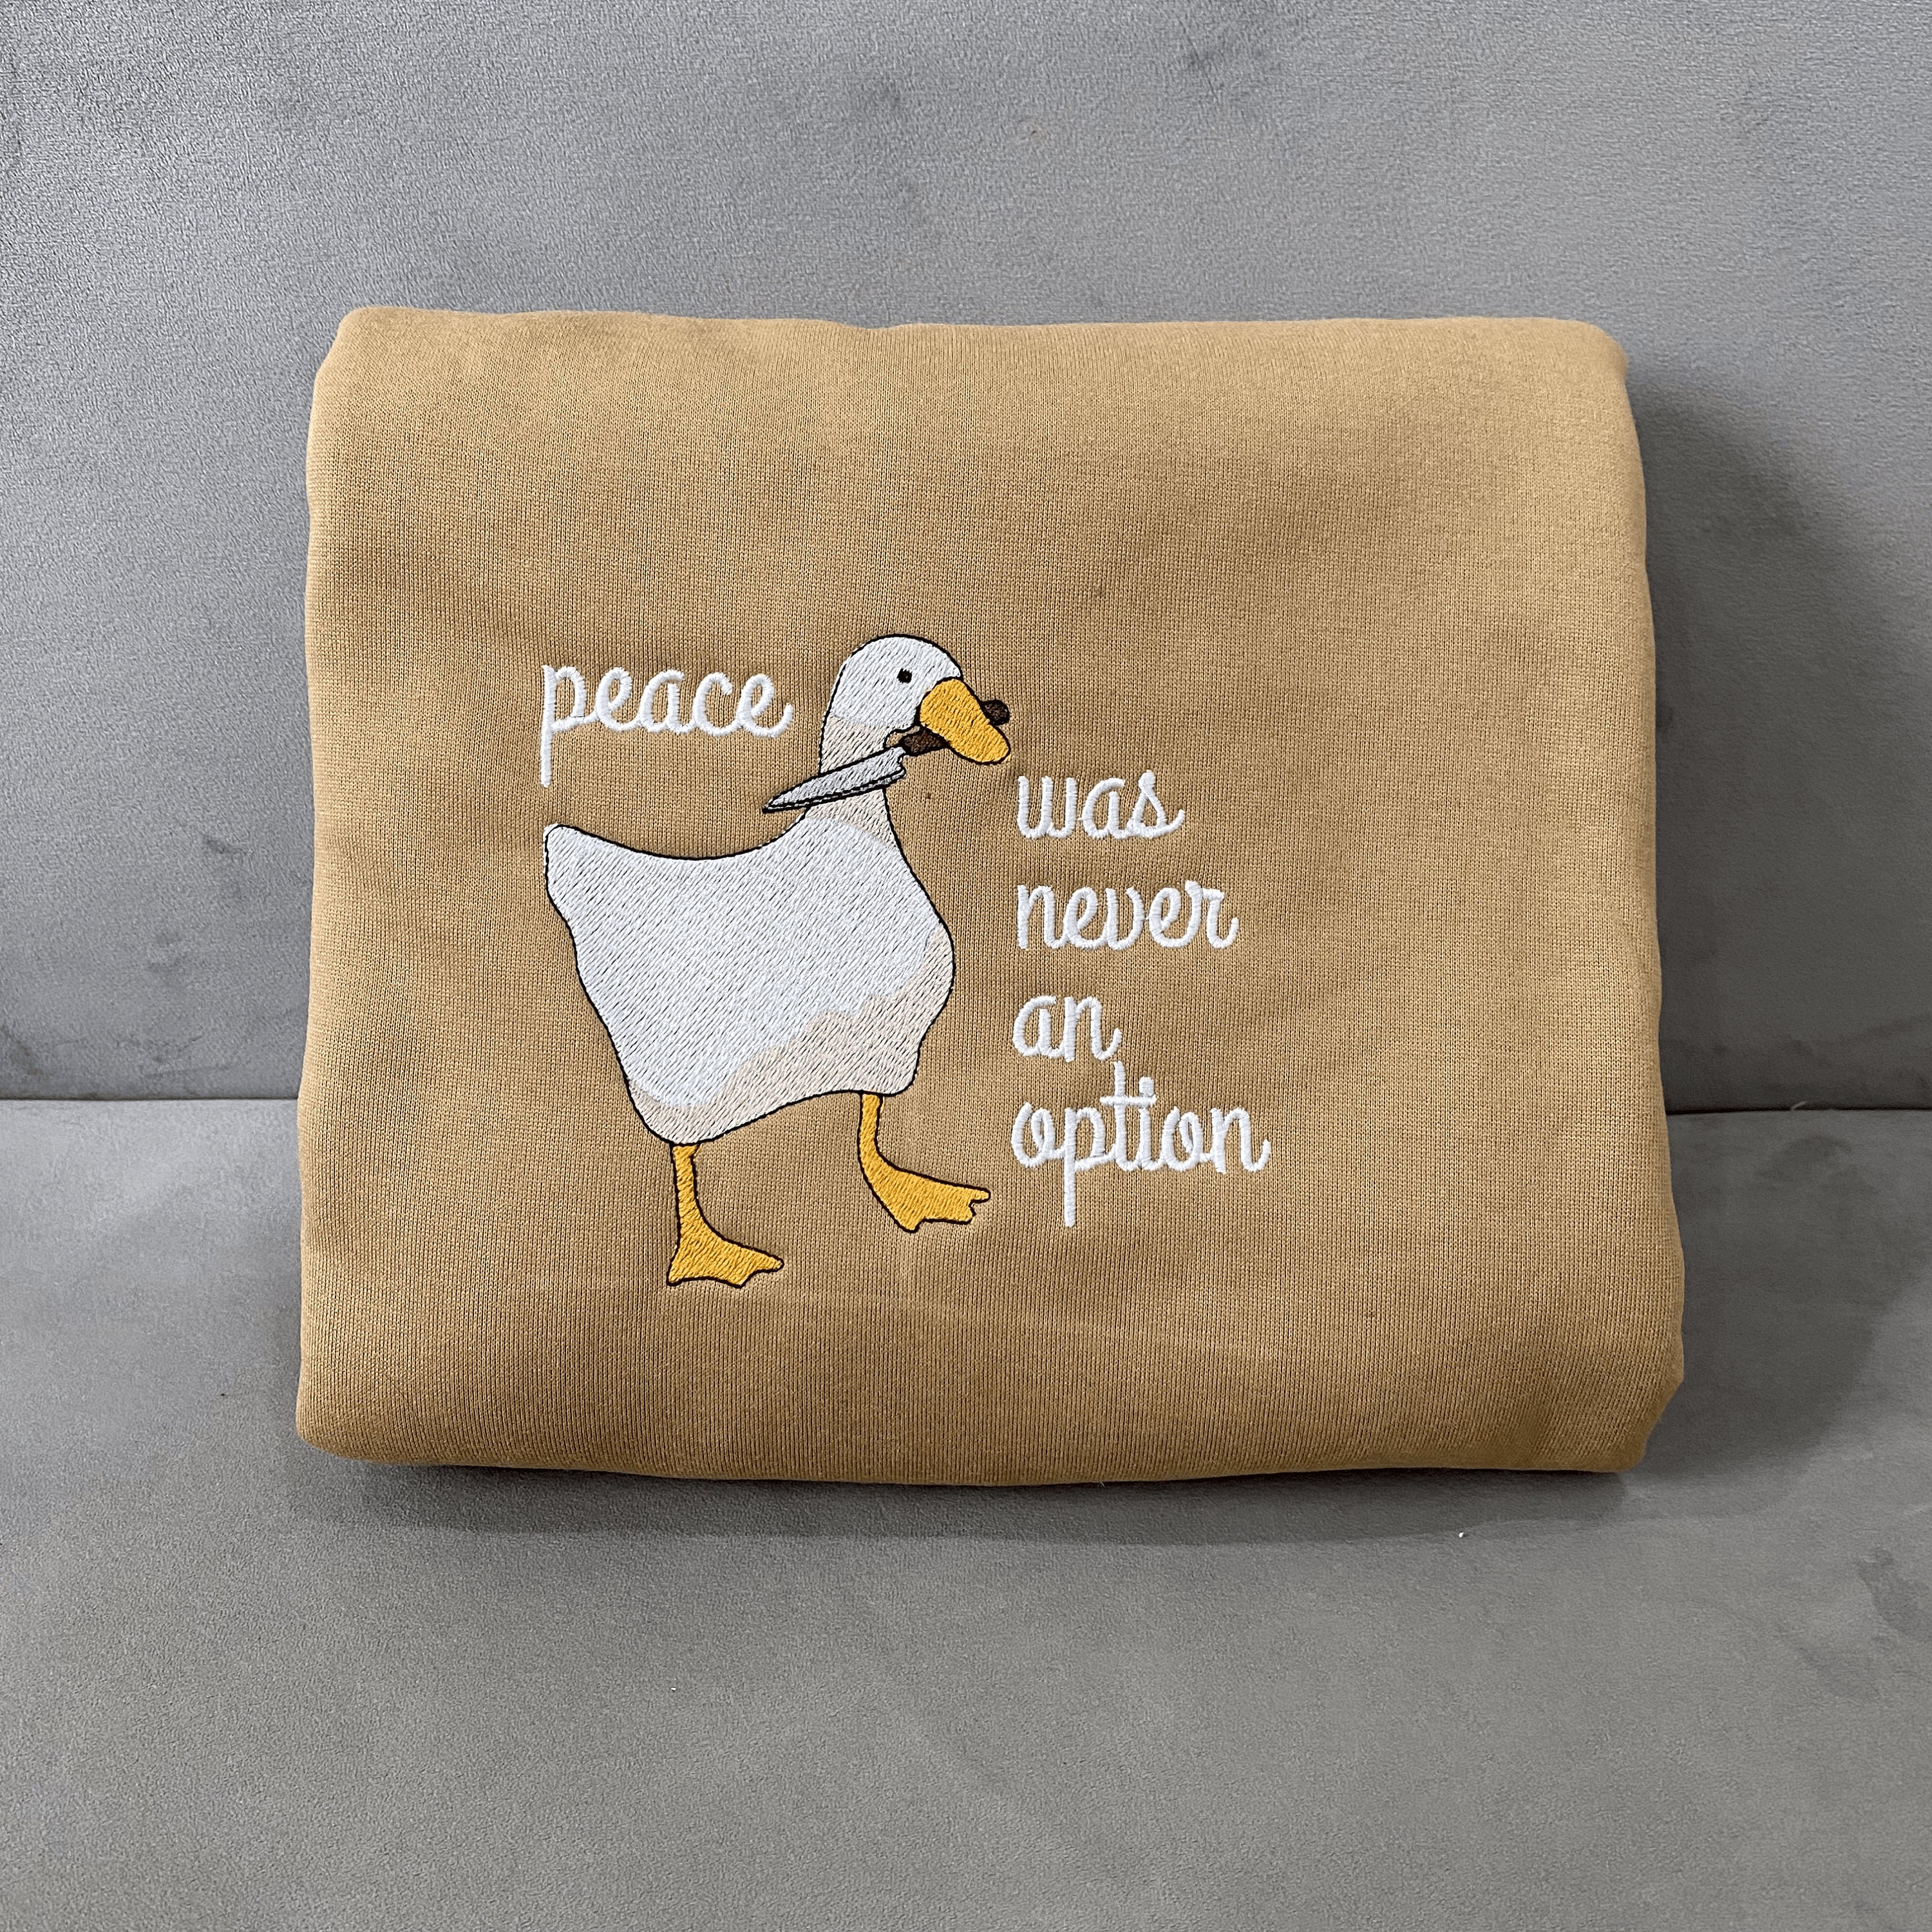 Discover Peace Was Never An Option Embroidered T-Shirt, Funny Goose Sweatshirt, Silly Goose Hoodie